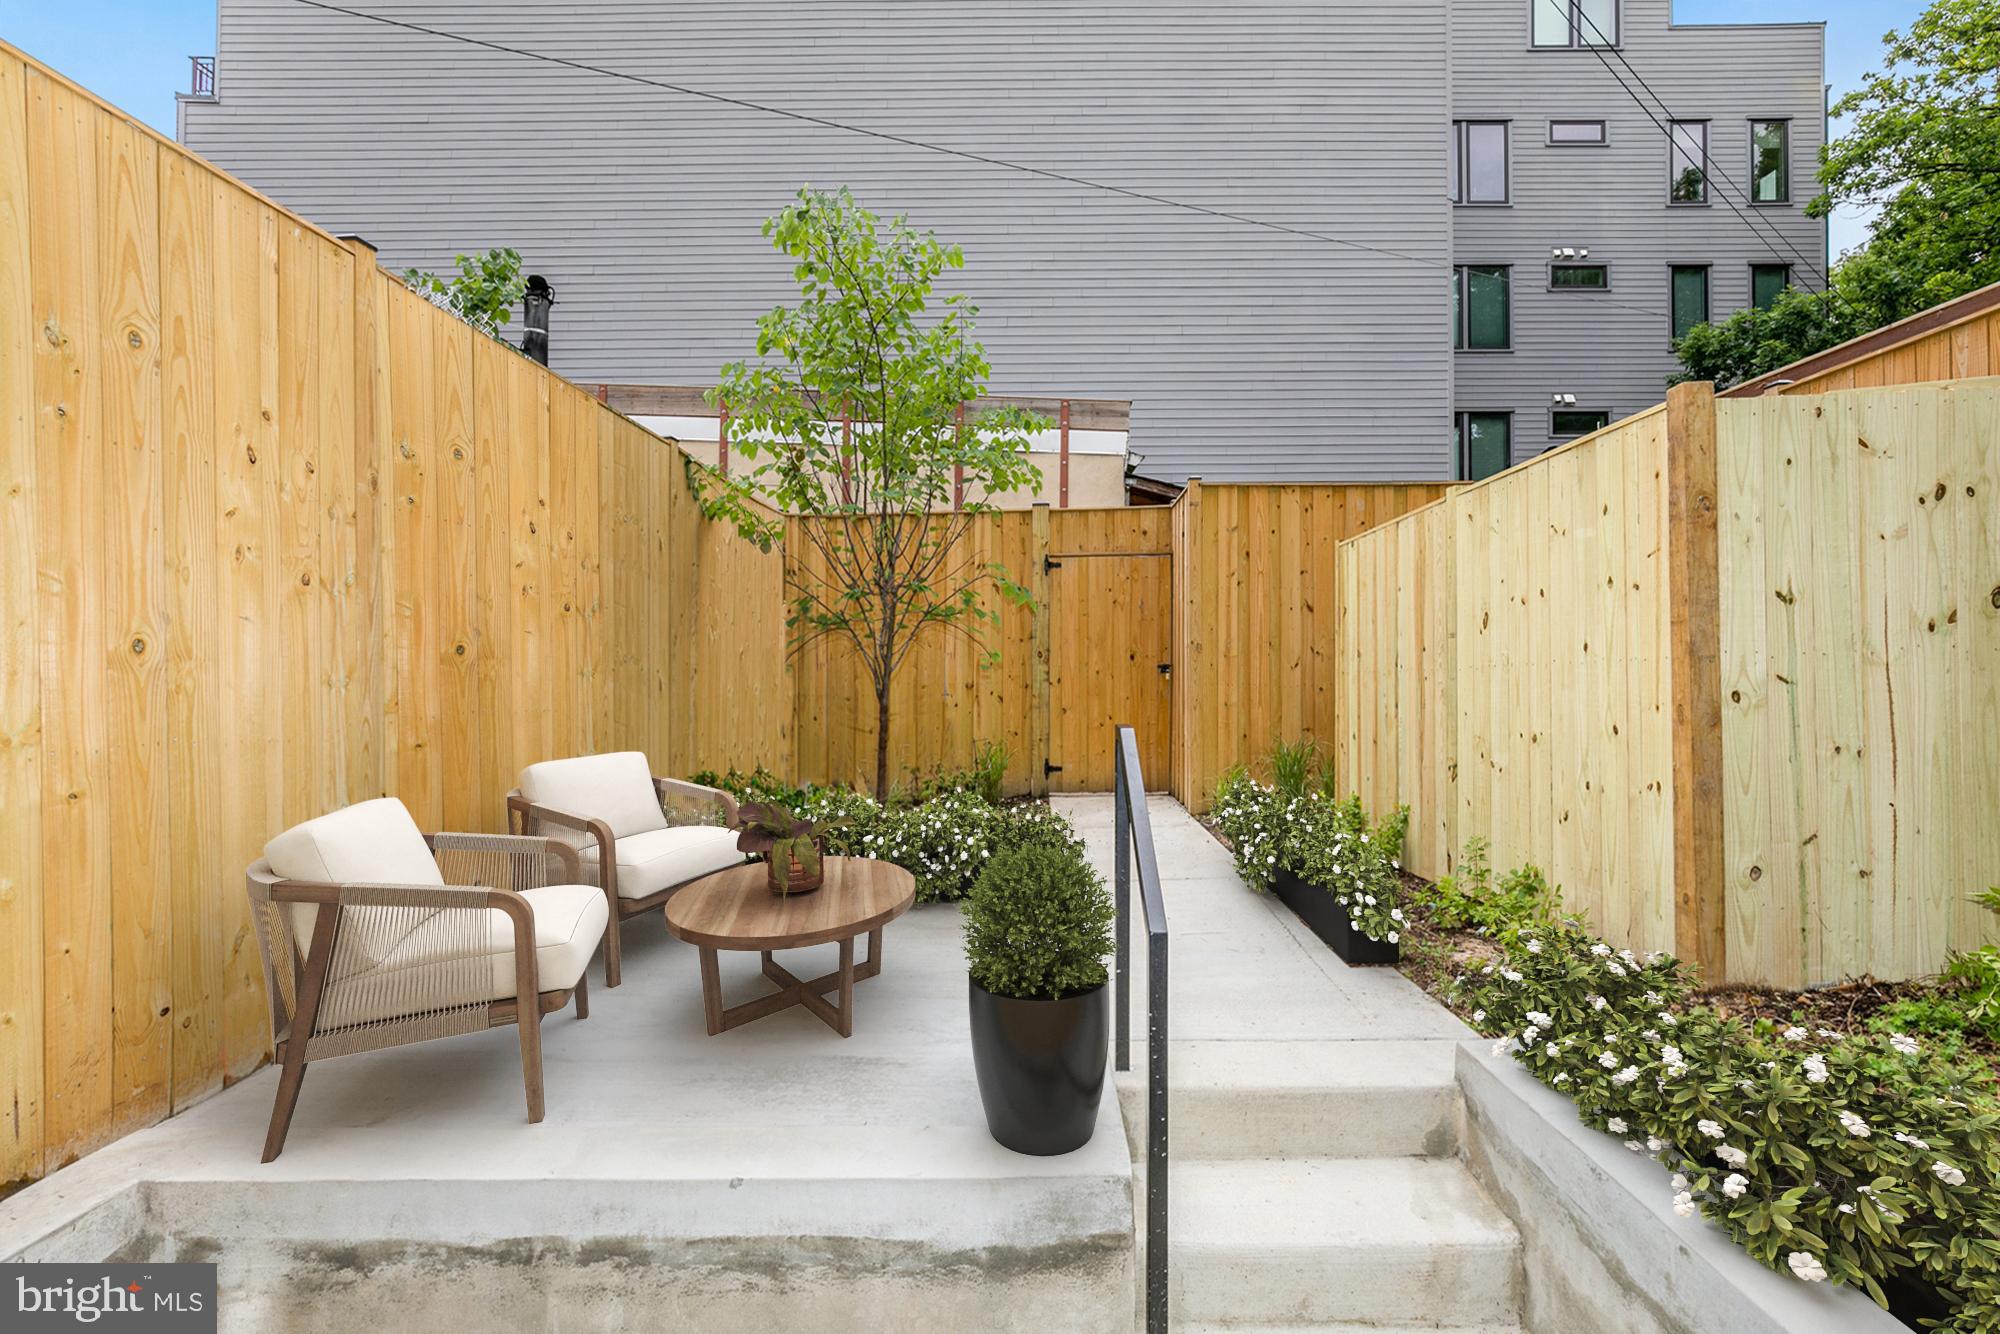 a outdoor space with patio furniture and plants